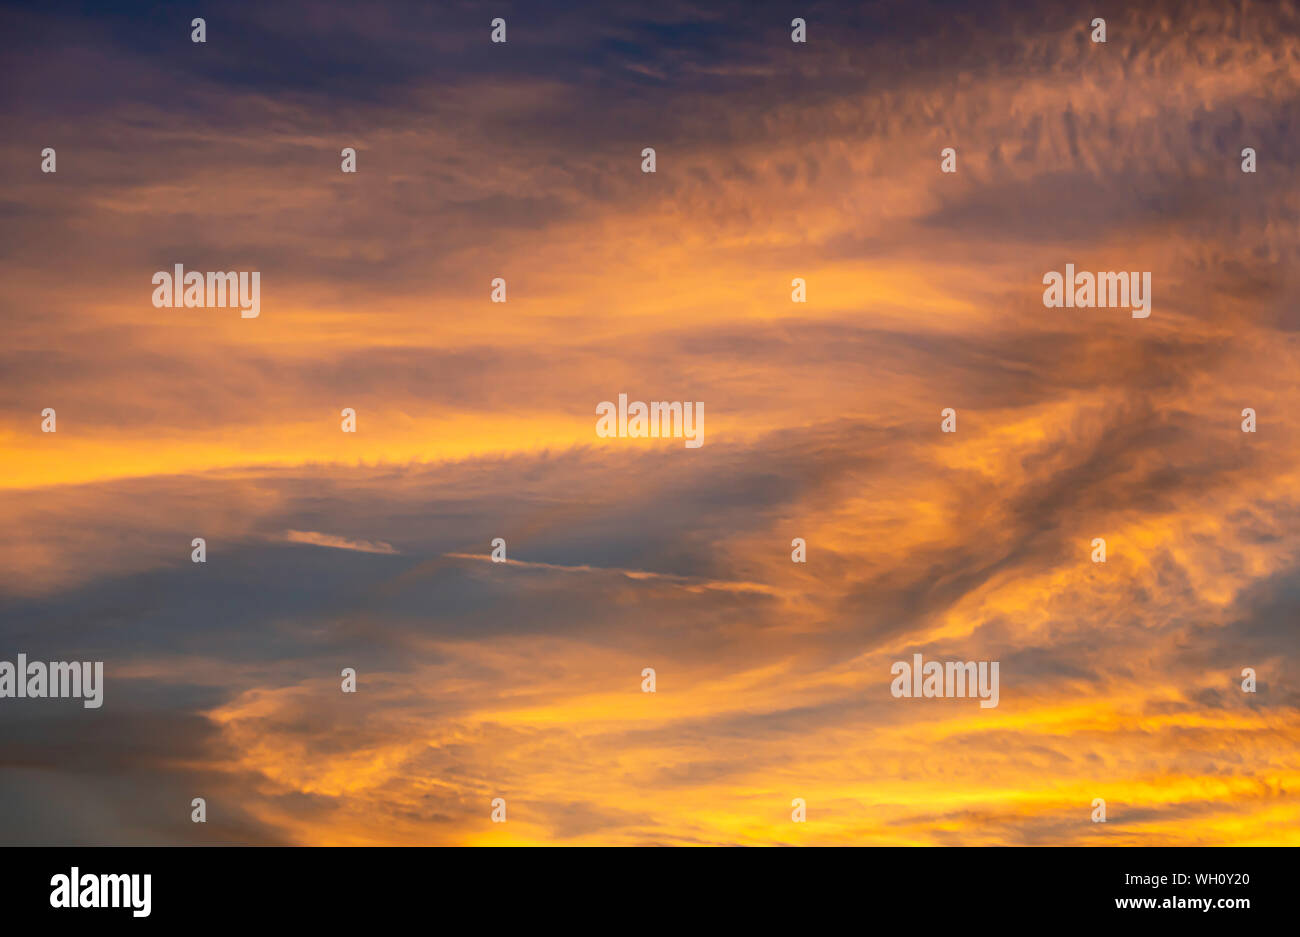 The golden light of the sun and clouds in the sky. Stock Photo